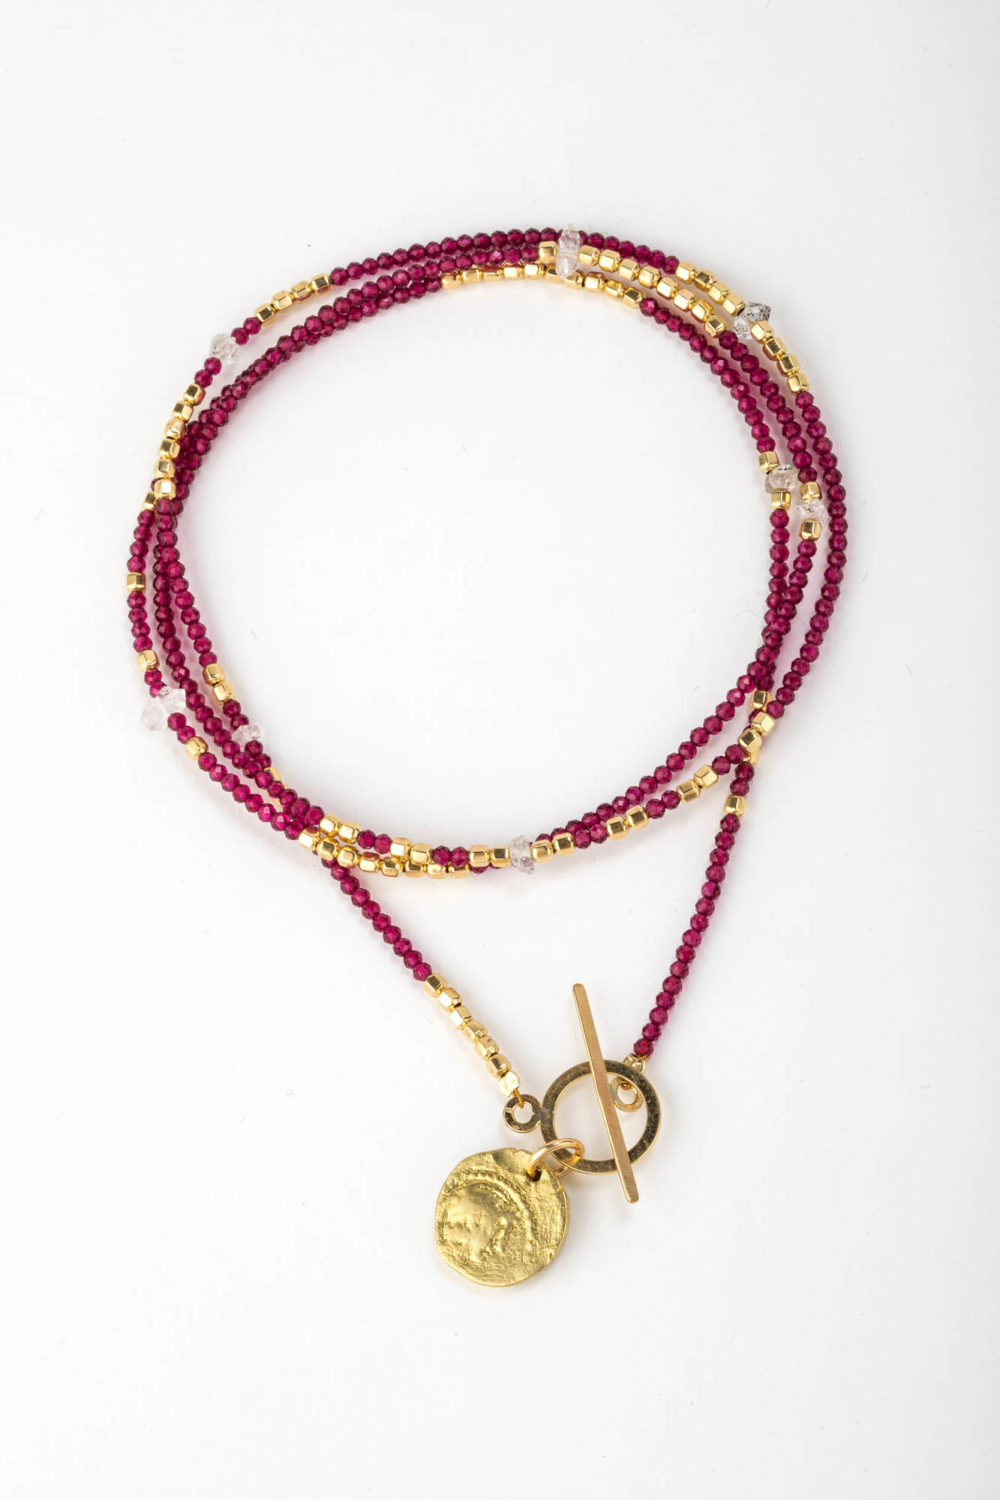 Close up on a tightly wrapped multi garnet and gold African beaded chain necklace with adjustable 14k gold fill closure and antique coin.